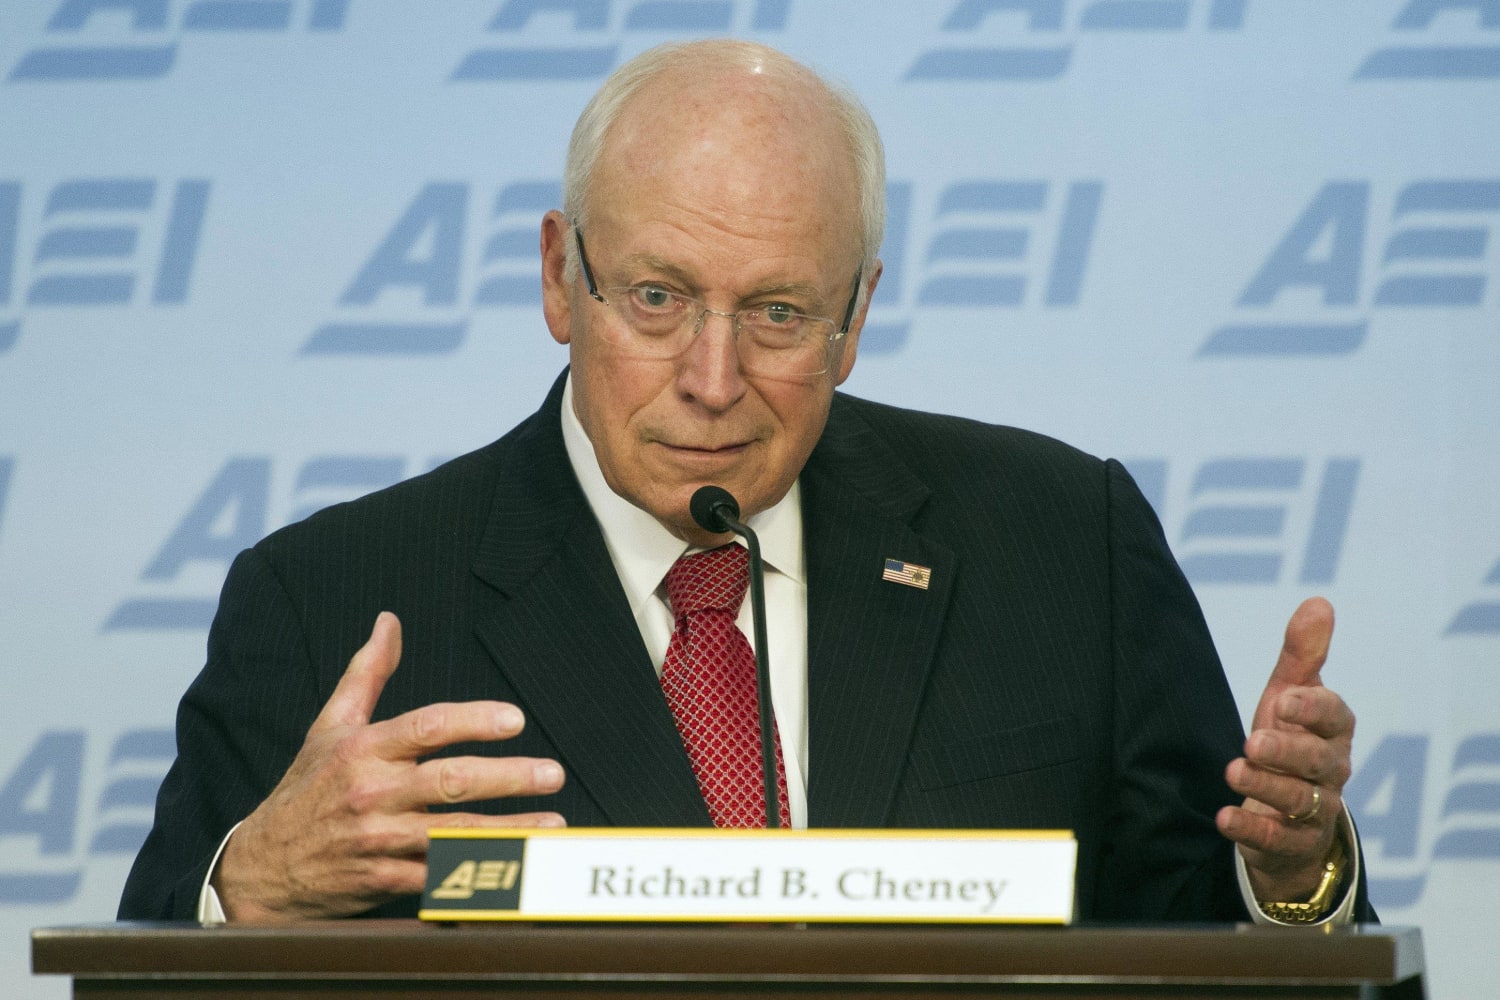 Did dick cheney want to go to iraq